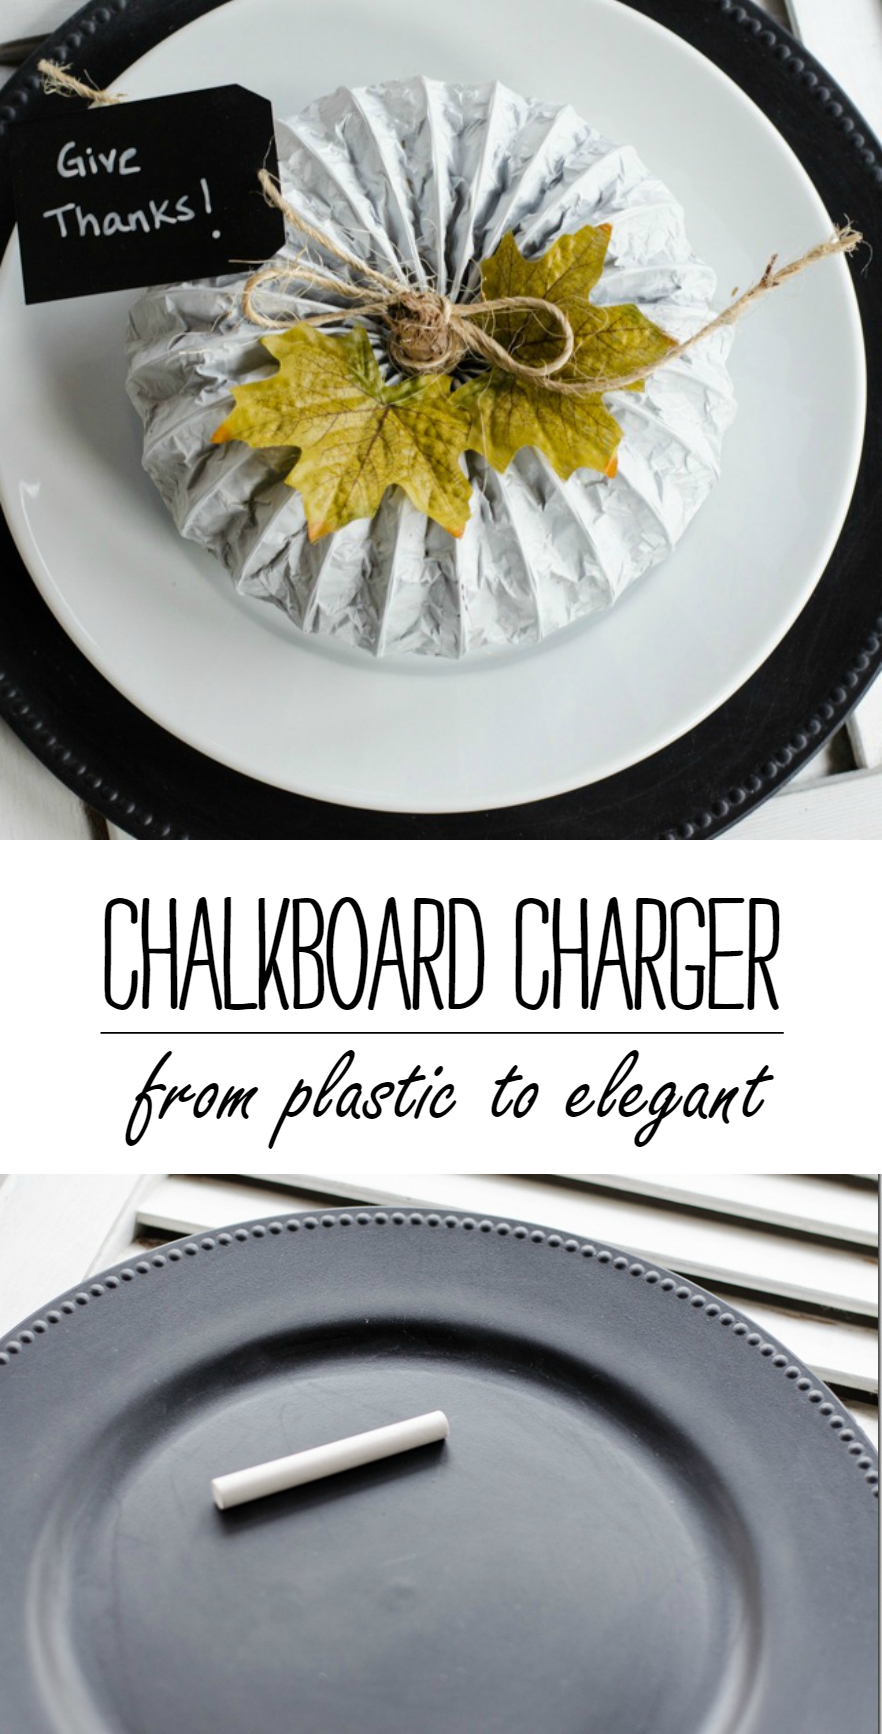 Holiday Table Settings Using DIY Chalkboard Chargers - Made from Plastic Dollar Store Plates